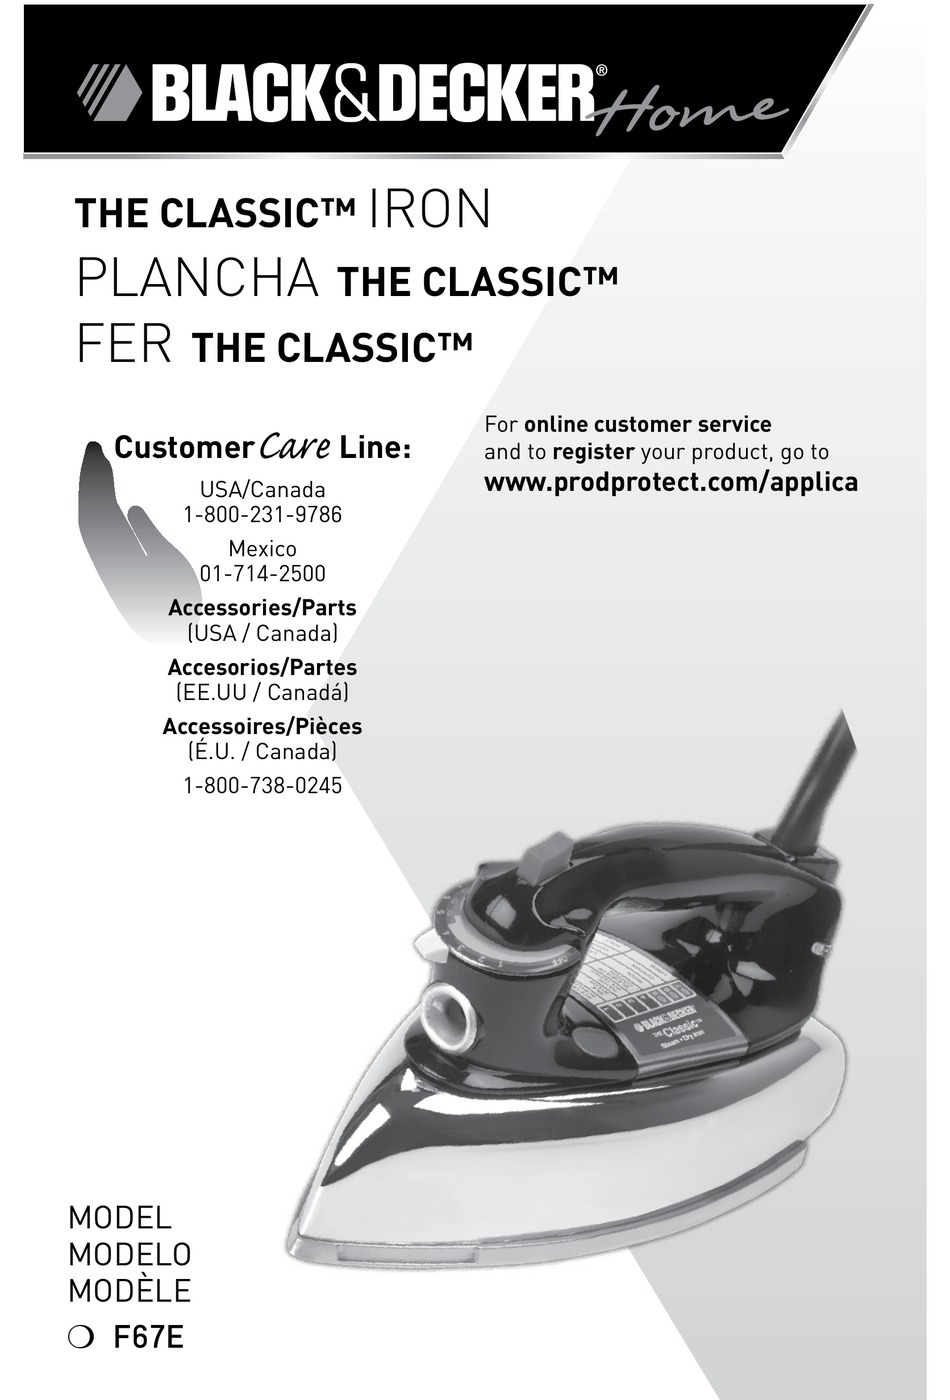 BLACK & DECKER THE CLASSIC F54 USE AND CARE BOOK MANUAL Pdf Download